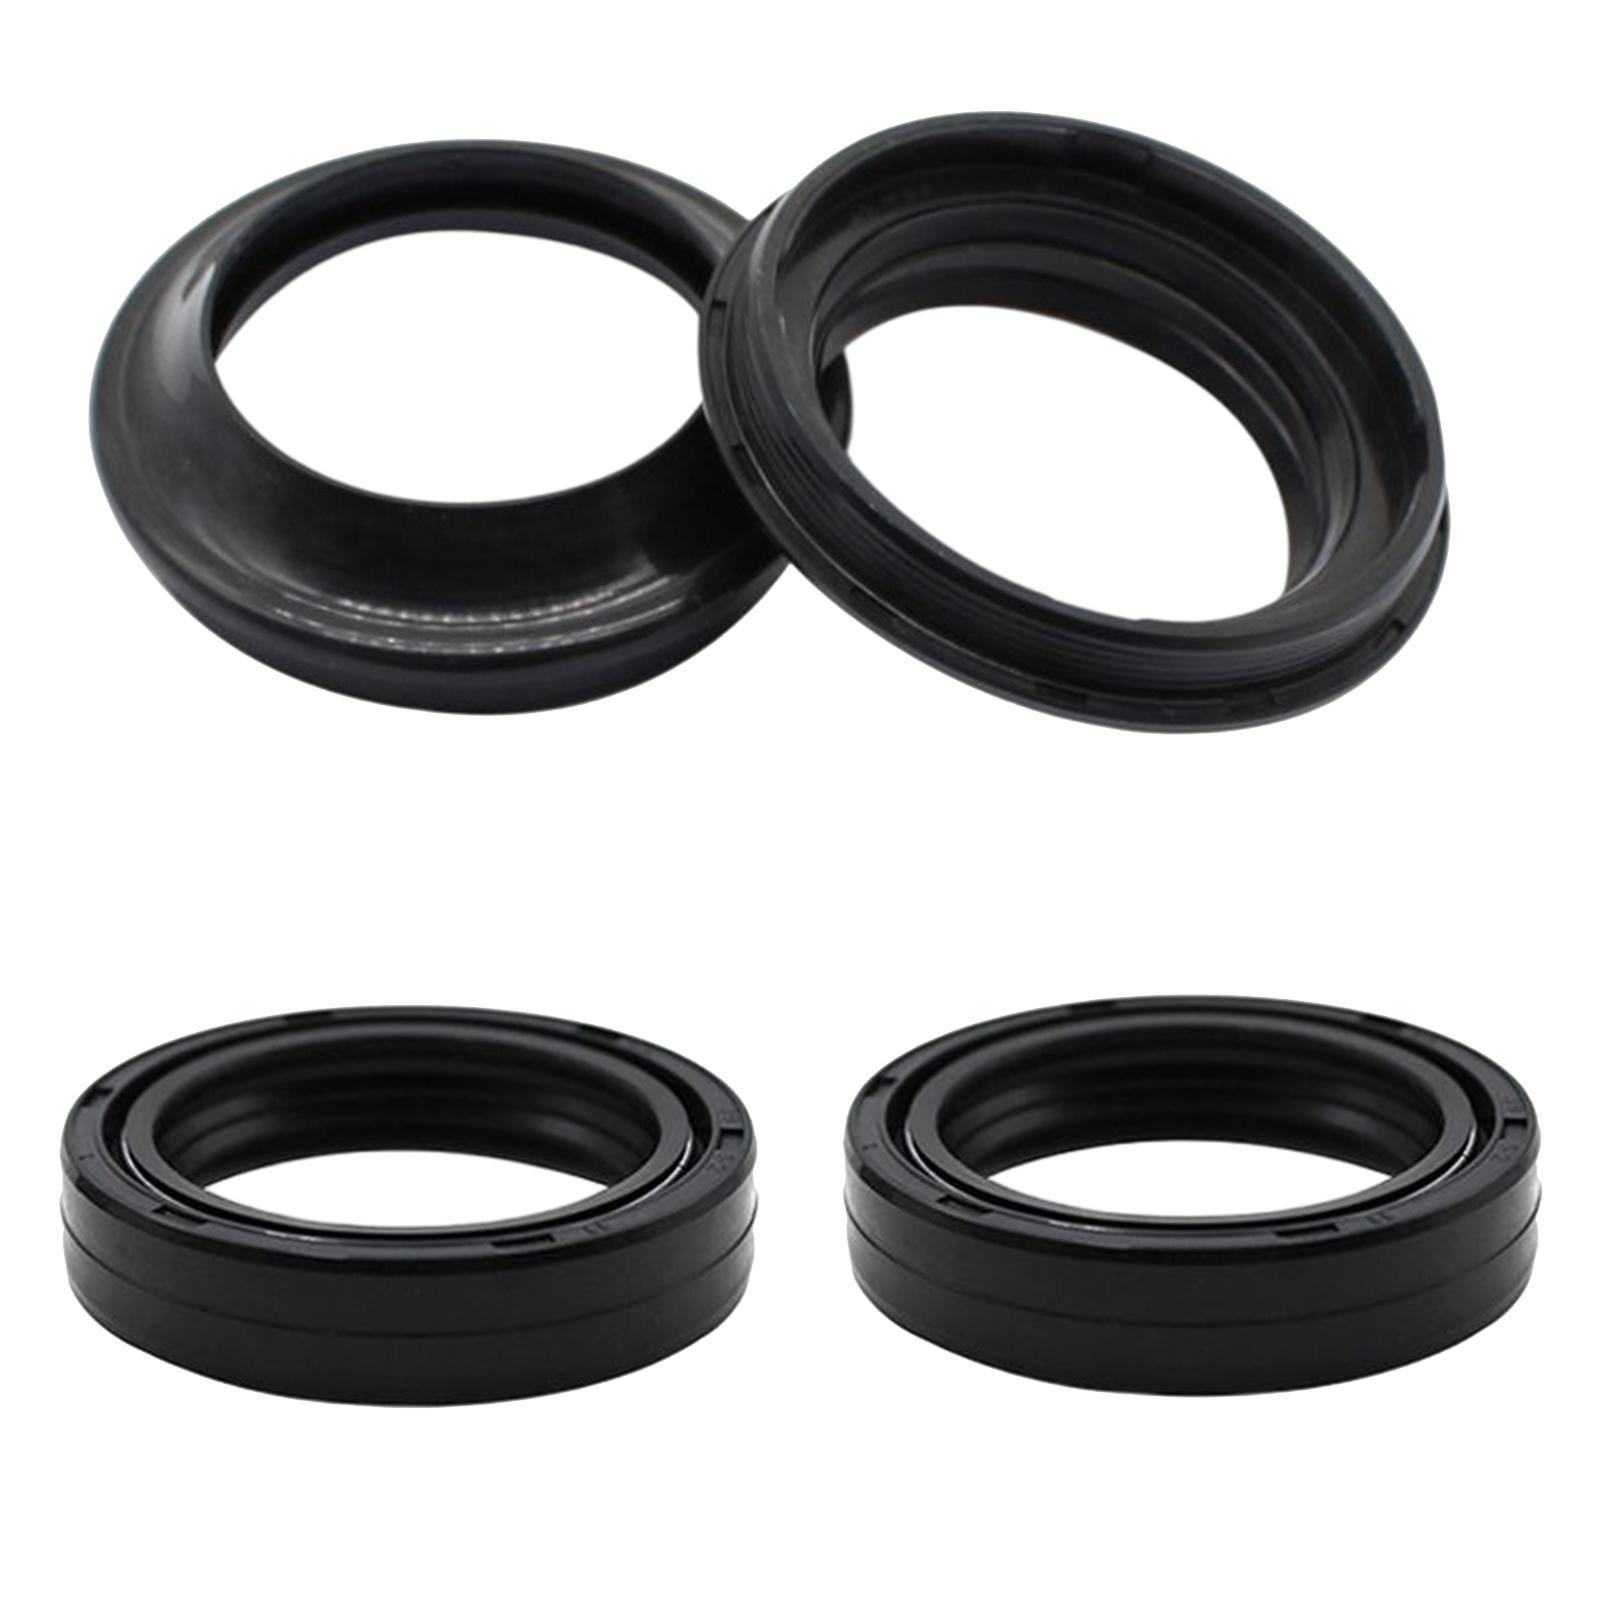 Front Fork Shock Oil Seal and Dust Seal Set for Suzuki Rm-Z450 Z400S